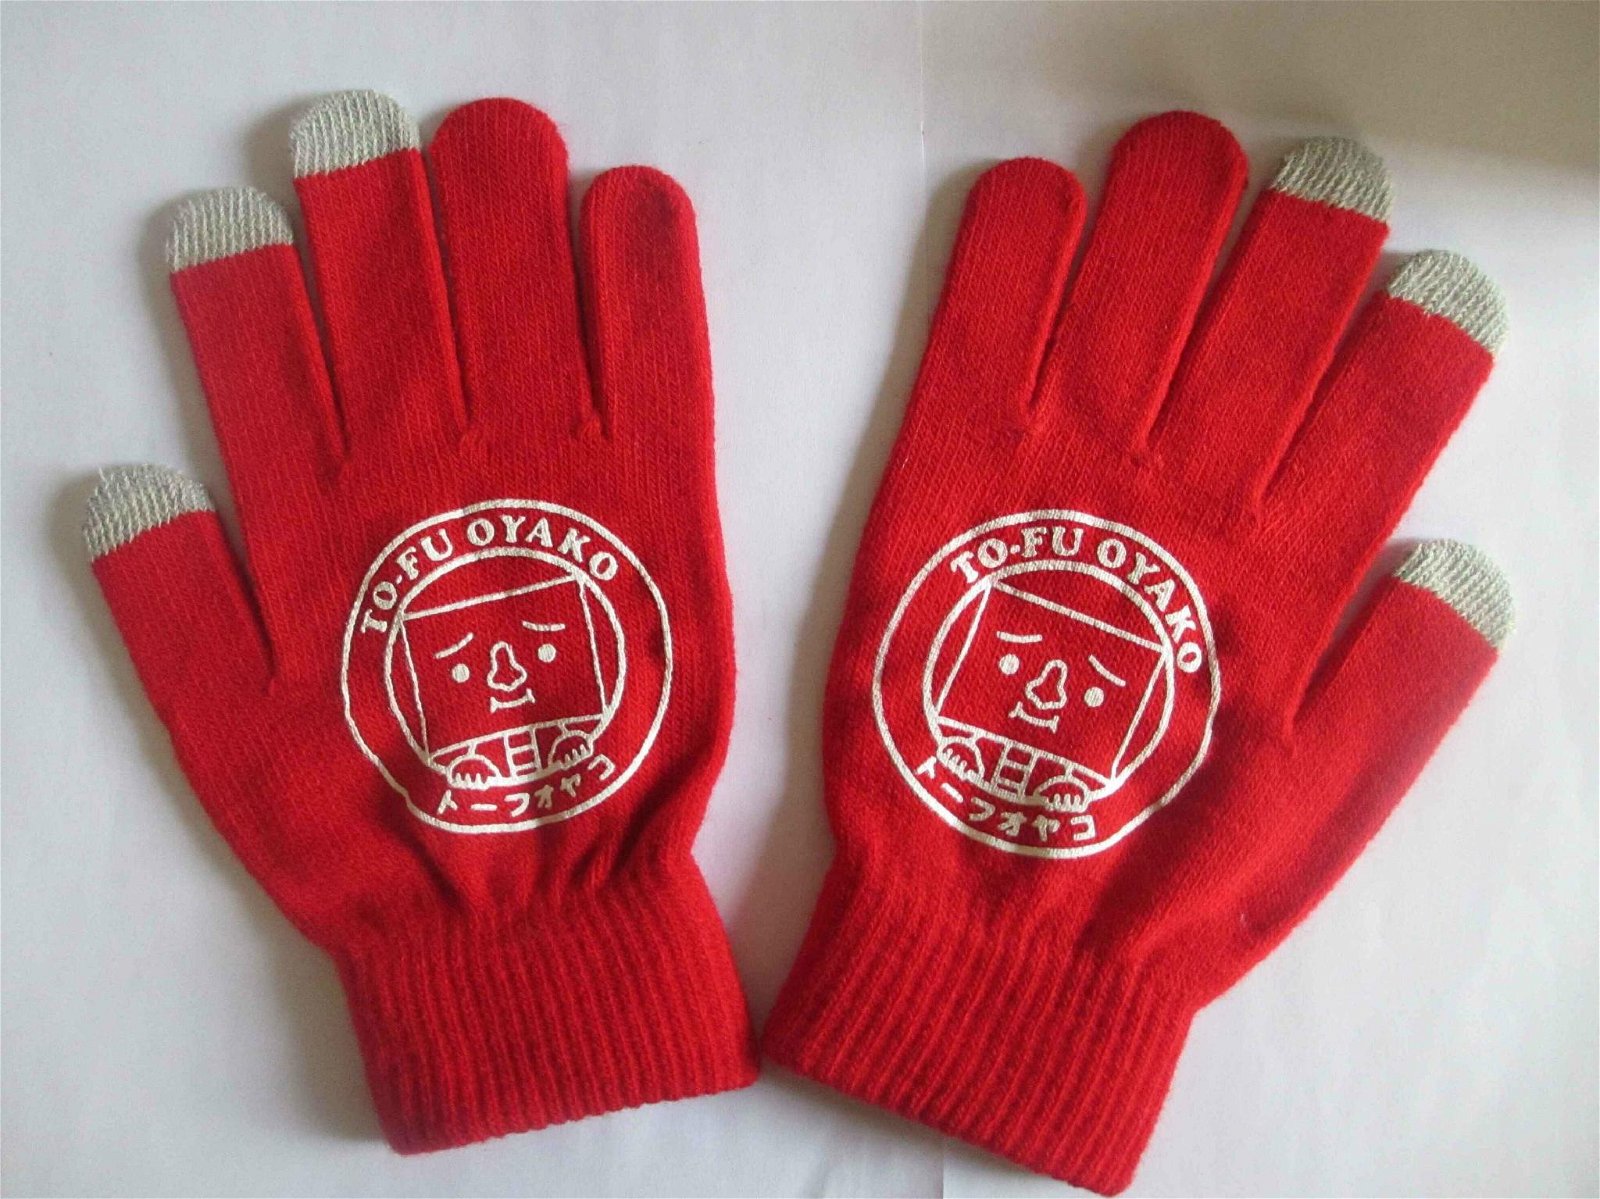 Good quality touch gloves 